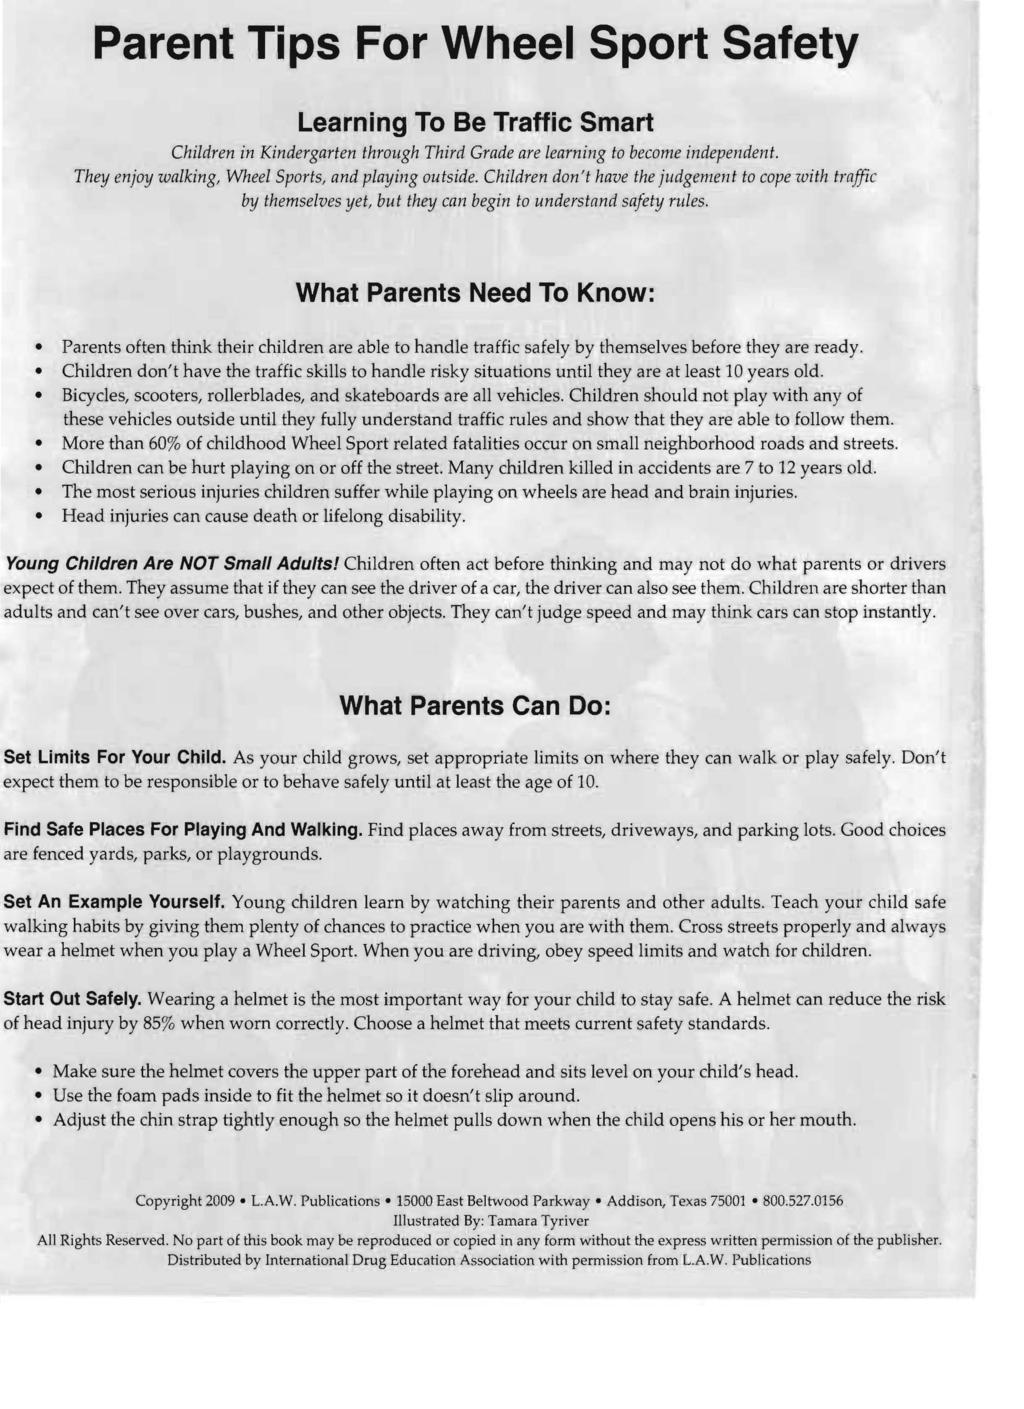 Parent Tips For Wheel Sport Safety Learning To Be Traffic Smart Children in Kindergarten through Third Grade are learning to become independent. They enjoy walking, Wheel Sports, and playing outside.